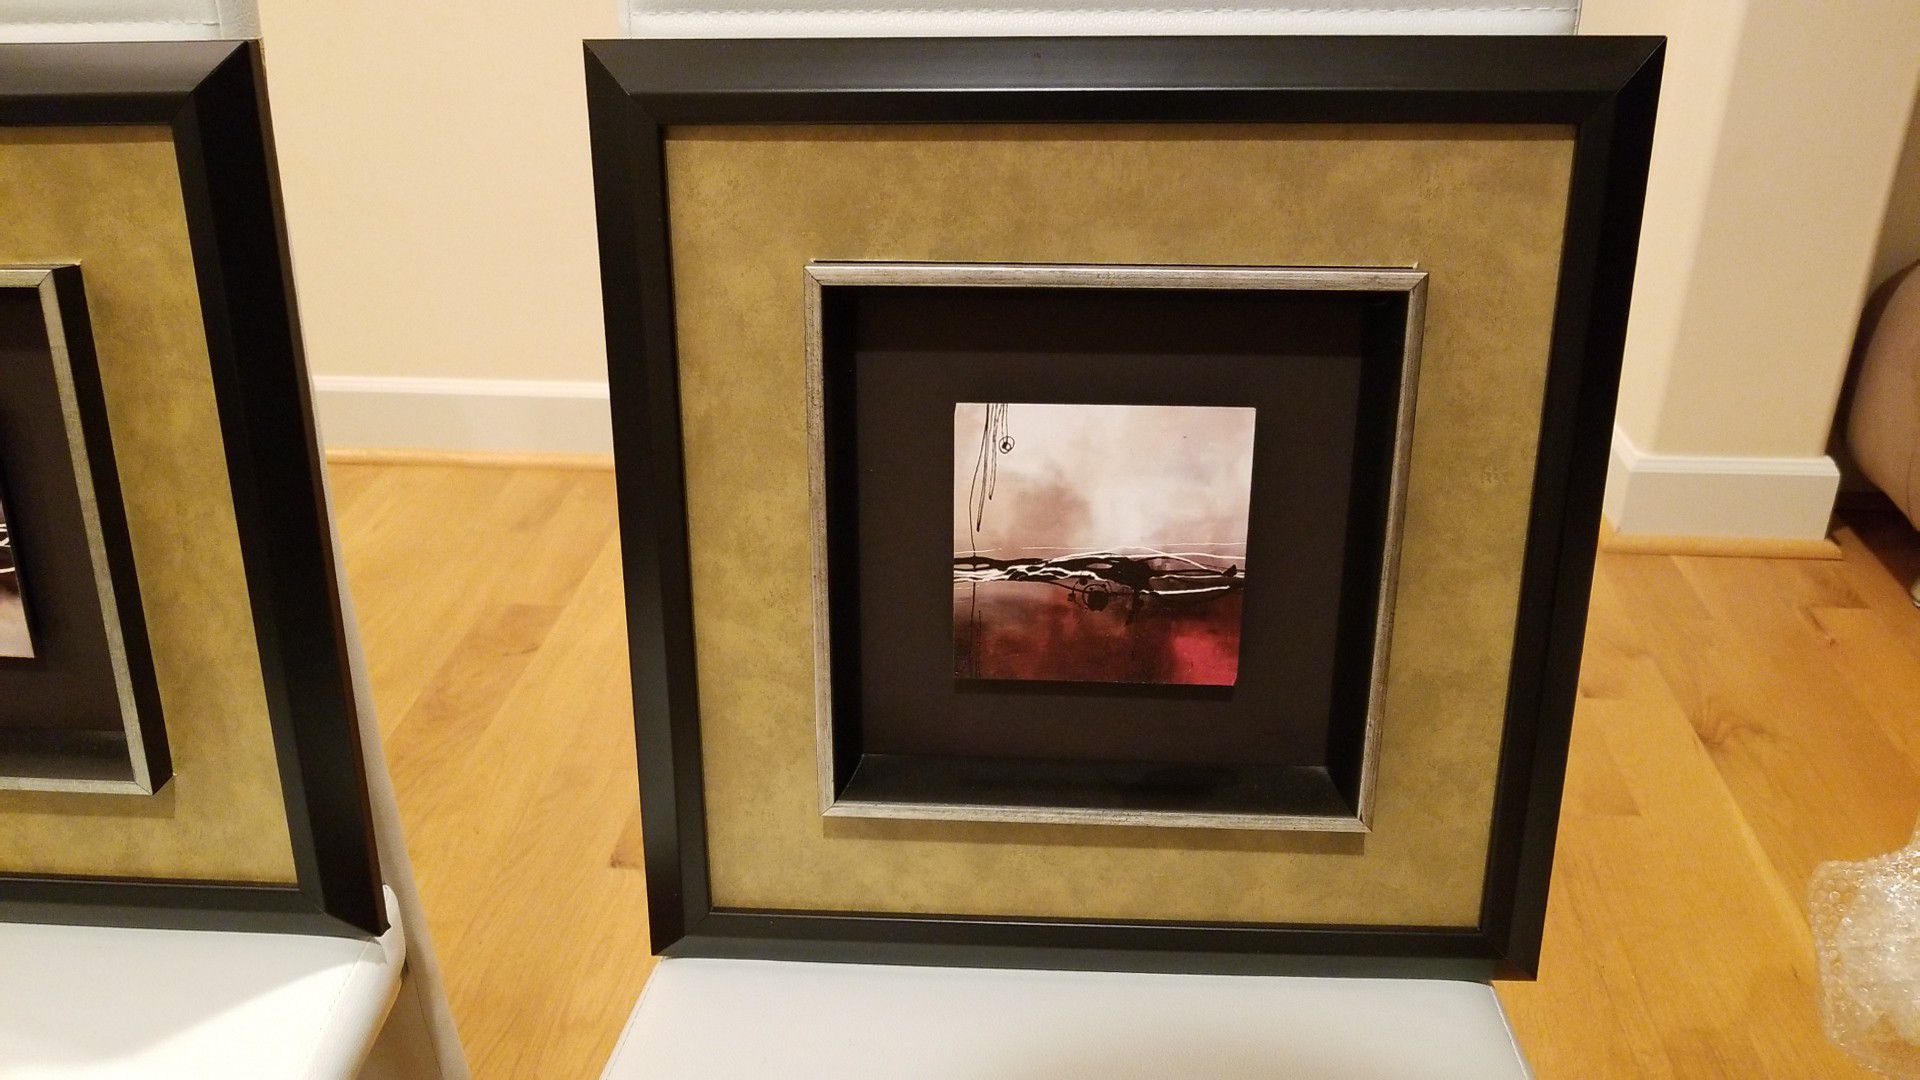 Two abstract framed wall art pictures from Bad Bath and Beyond